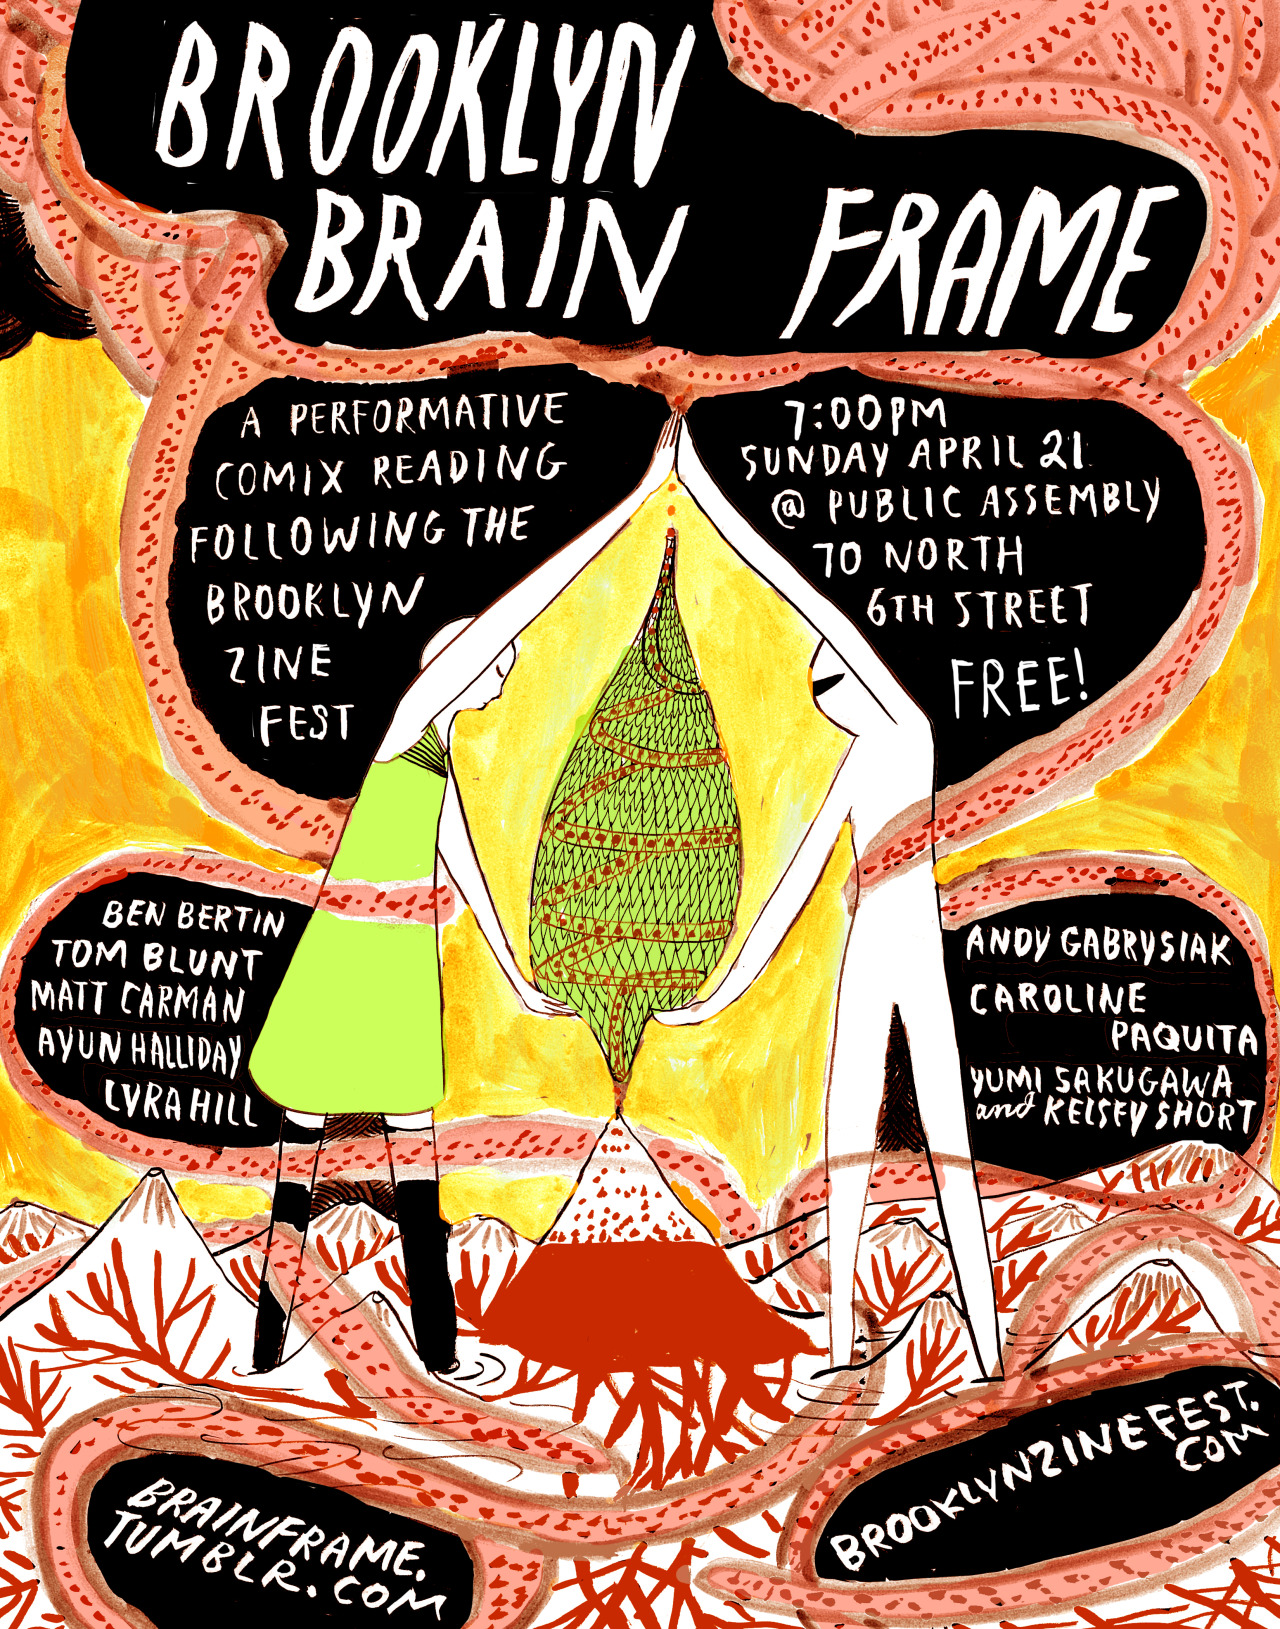 Announcing BROOKLYN BRAIN FRAME
BRAIN FRAME, the performative comix reading series (and Chicago&#8217;s most valuable export) is coming to New York. Watch six artists from around the country mount the pulpit to interpret their comics and zines with maximum force. Musical histories, landscape gifs, a UFO puppet, photos of forgotten females, horror crystals, and a vajazzling cat are just are few of the many splendors on imminent display. Laugh, cry, sit back, and relax // expanded comix // expanded minds.Featuring:Ben BertinTom BluntMatt CarmanAyun HallidayLyra HillAndy GabrysiakCaroline Paquitaand a joint reading from Yumi Sakugawa and Kelsey ShortWith live synthesizer soundscapes by Tyson TorstensonAt Public Assembly, 70 North 6th St, Brooklyn. Doors at 7:00, 21+, FREE.Brooklyn Brain Frame is organized in association with the 2nd annual Brooklyn Zine Fest. Come by between 11am and 6pm to browse wares and meet the night&#8217;s performers, then come back at 7 to watch the fireworks.
Poster by Yumi Sakugawa.